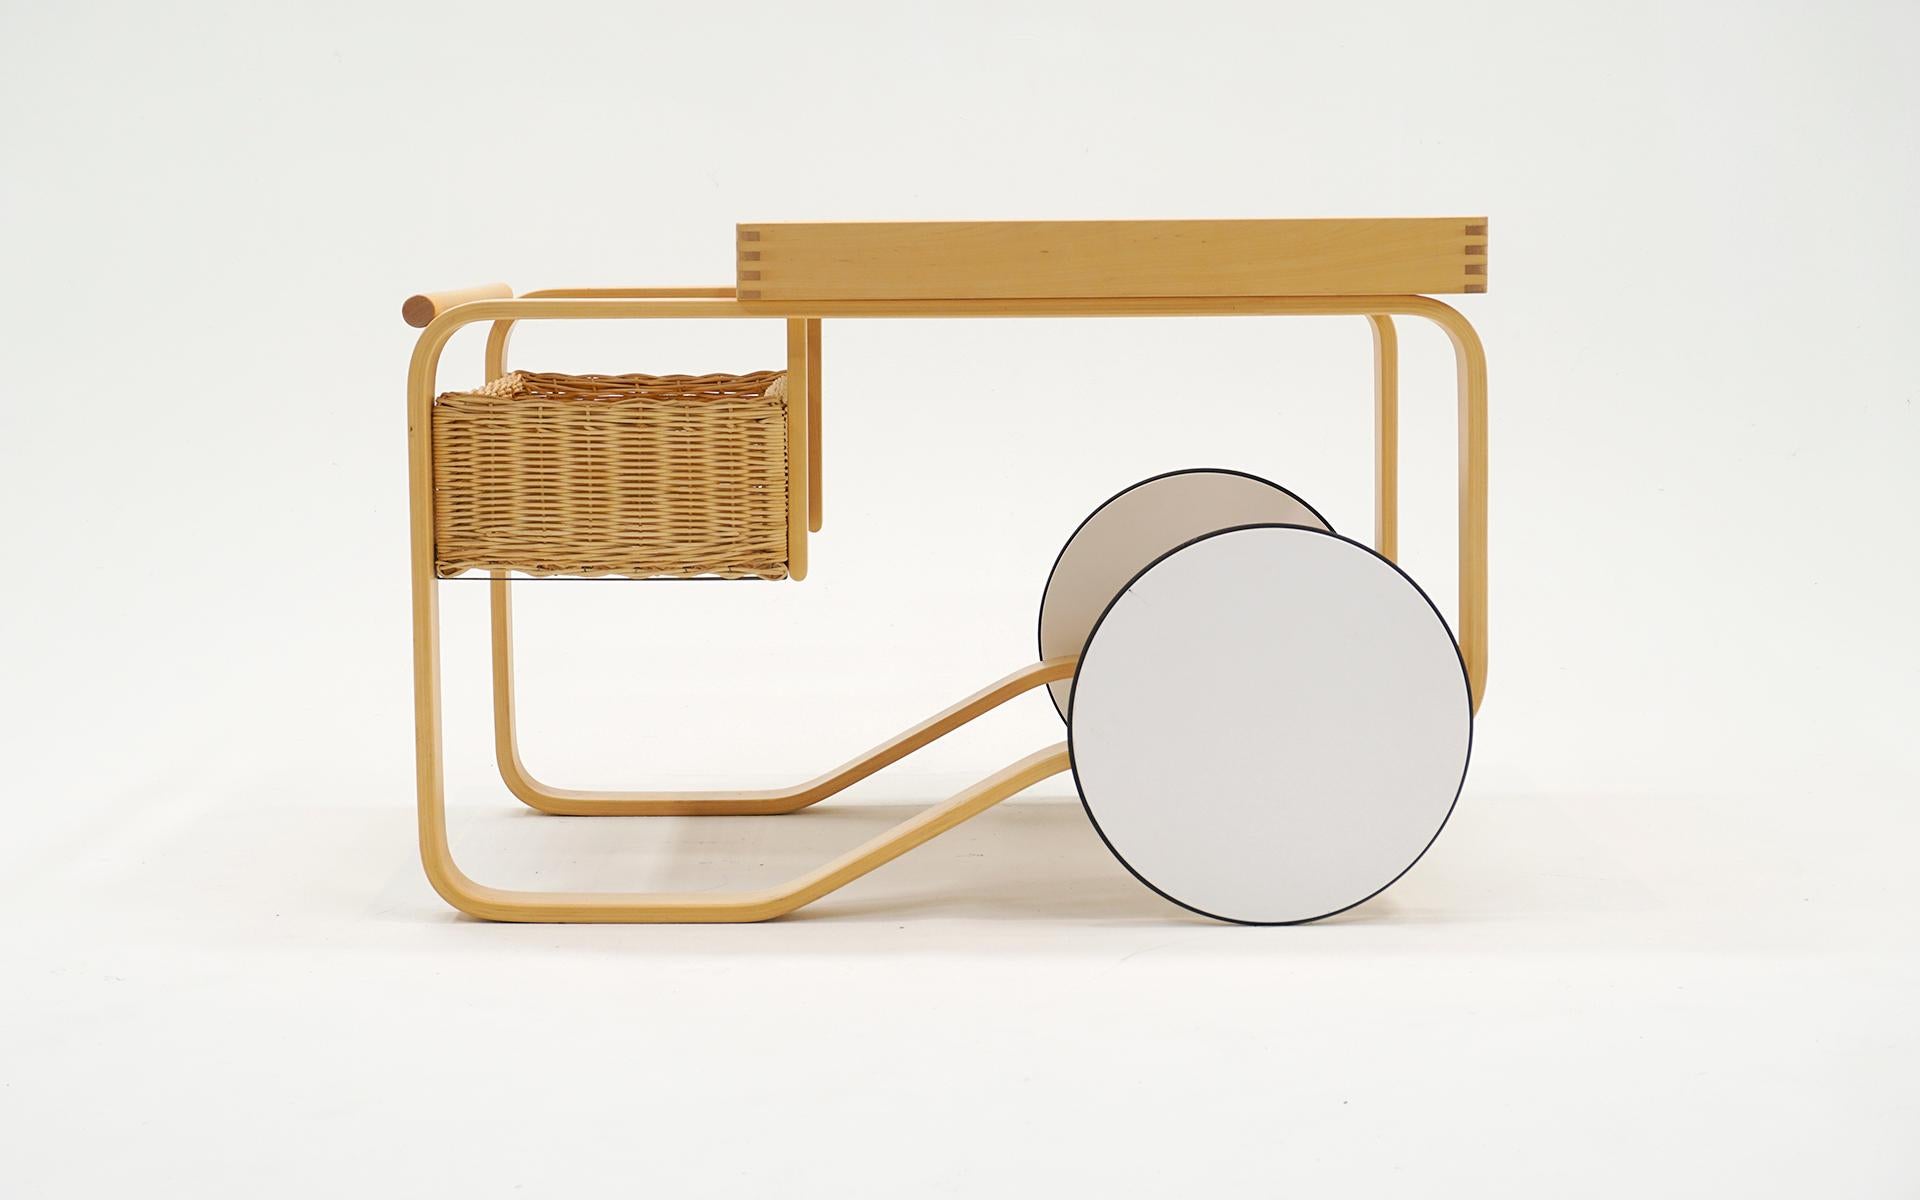 Alvar Aalto iconic Tea Cart 900 produced by Artek.  This example is in very good condition with few signs of use.  Birch wood frame and rattan basket.  Great mid century design.  Functions perfectly.  Ready to use.